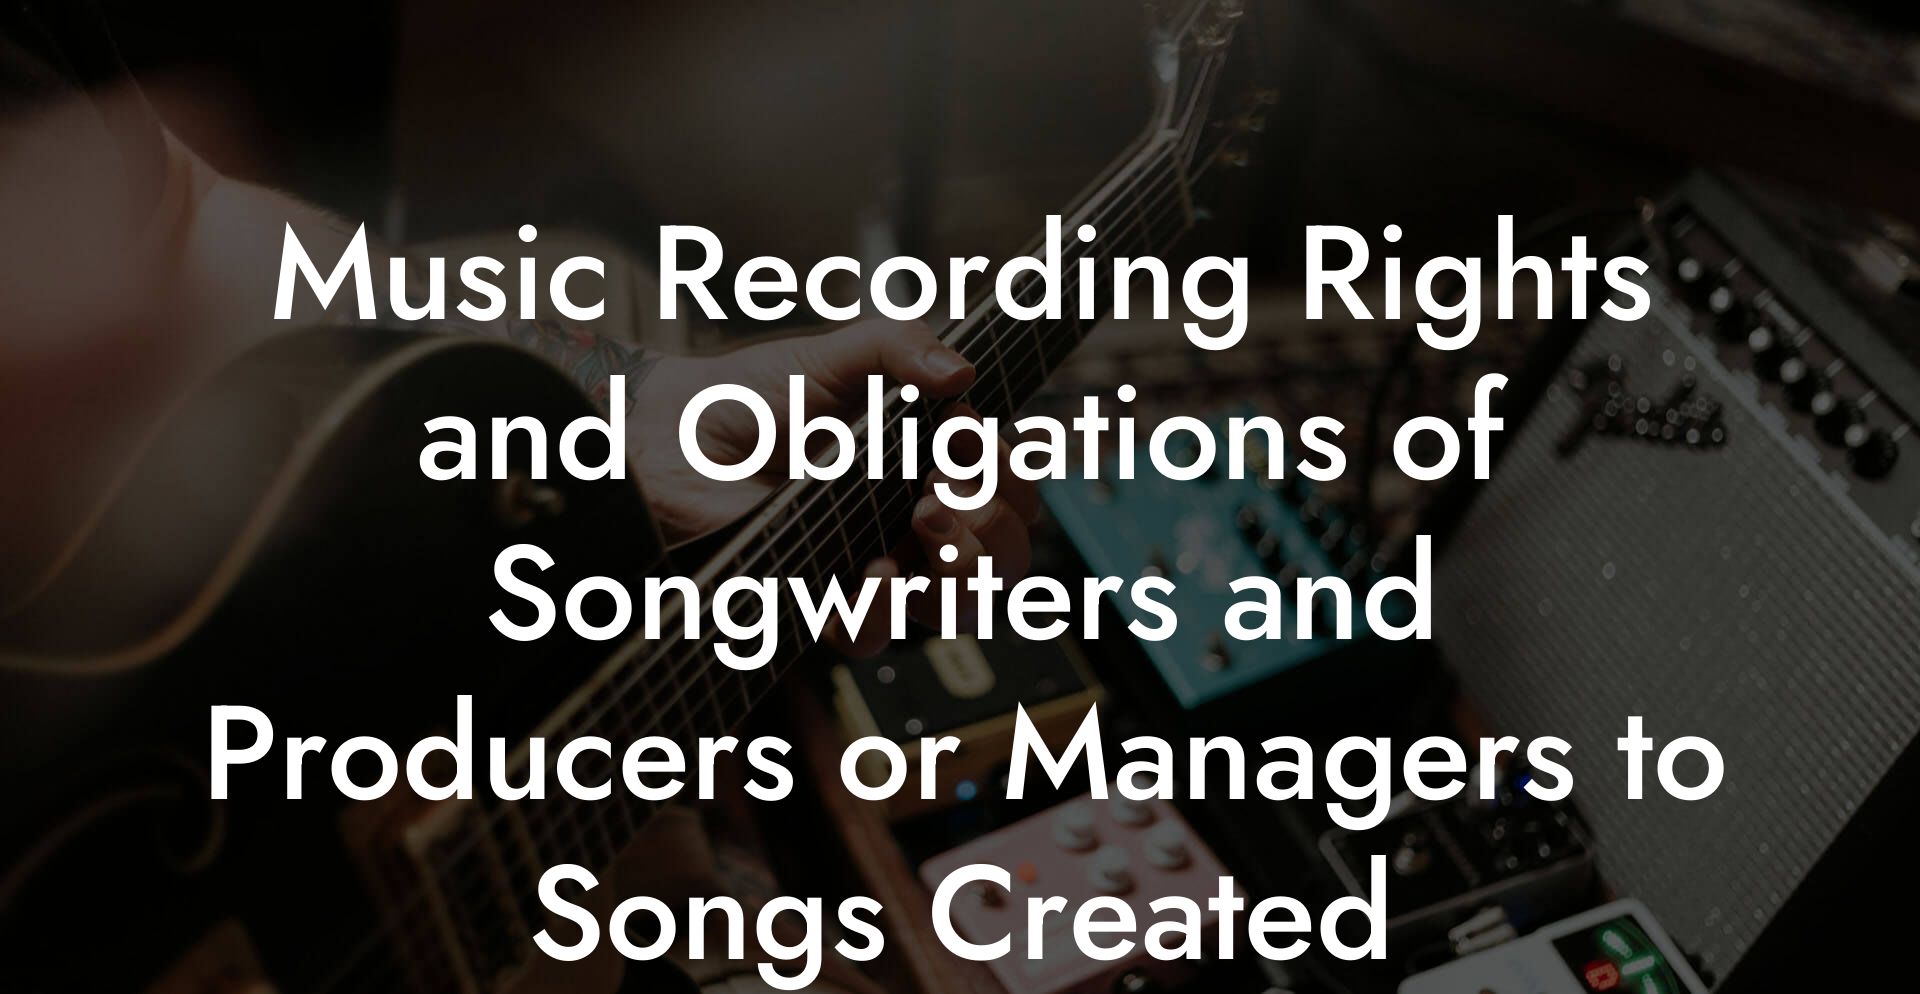 Music Recording Rights and Obligations of Songwriters and Producers or Managers to Songs Created